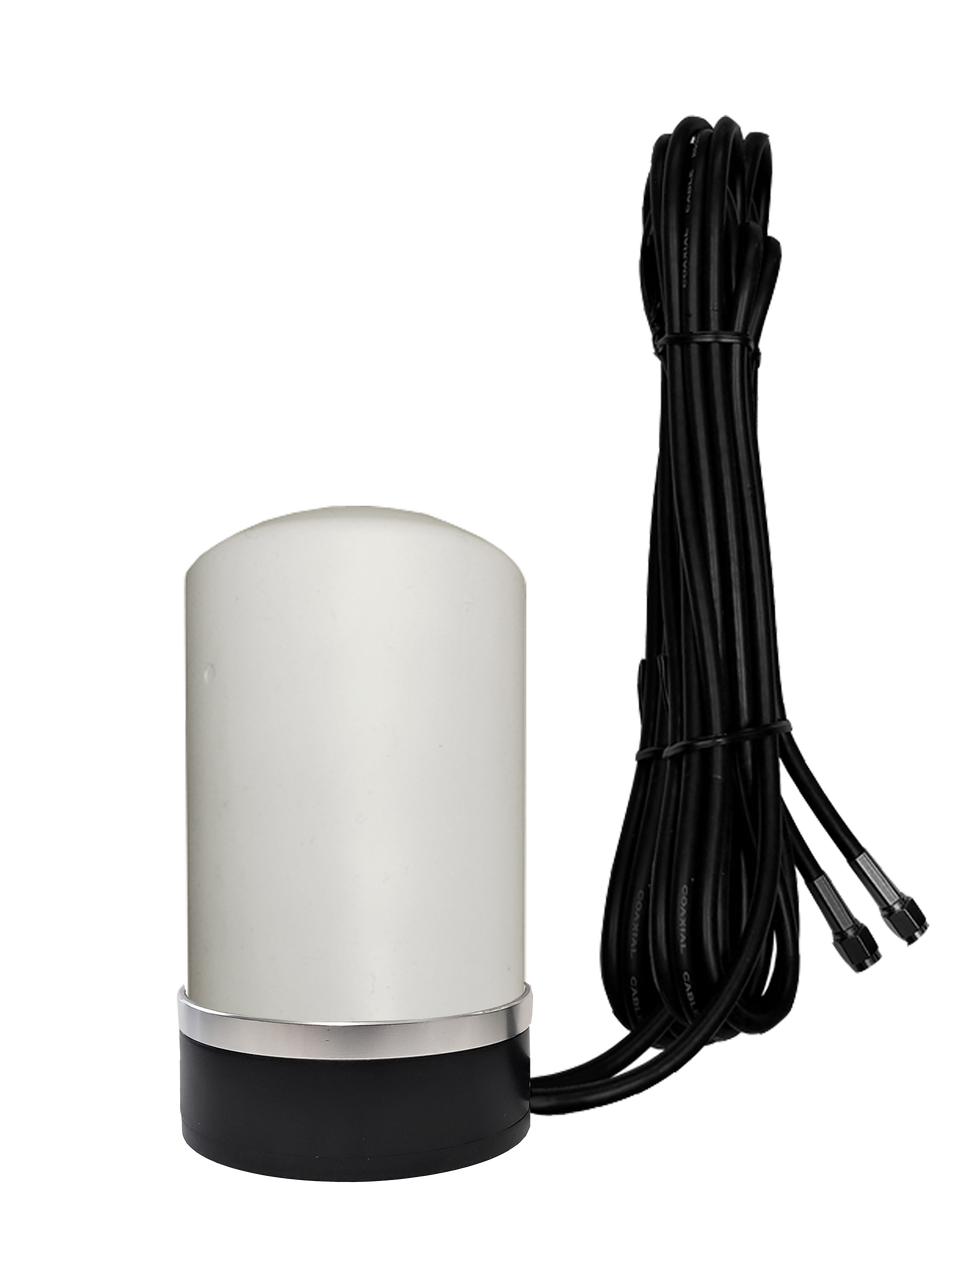 M17M Omni Directional MIMO Cellular 4G 5G LTE AWS XLTE M2M IoT Magnetic Base Antenna for Inseego SKYUS-110 Gateway w/16ft Coax Cables -2  x SMA